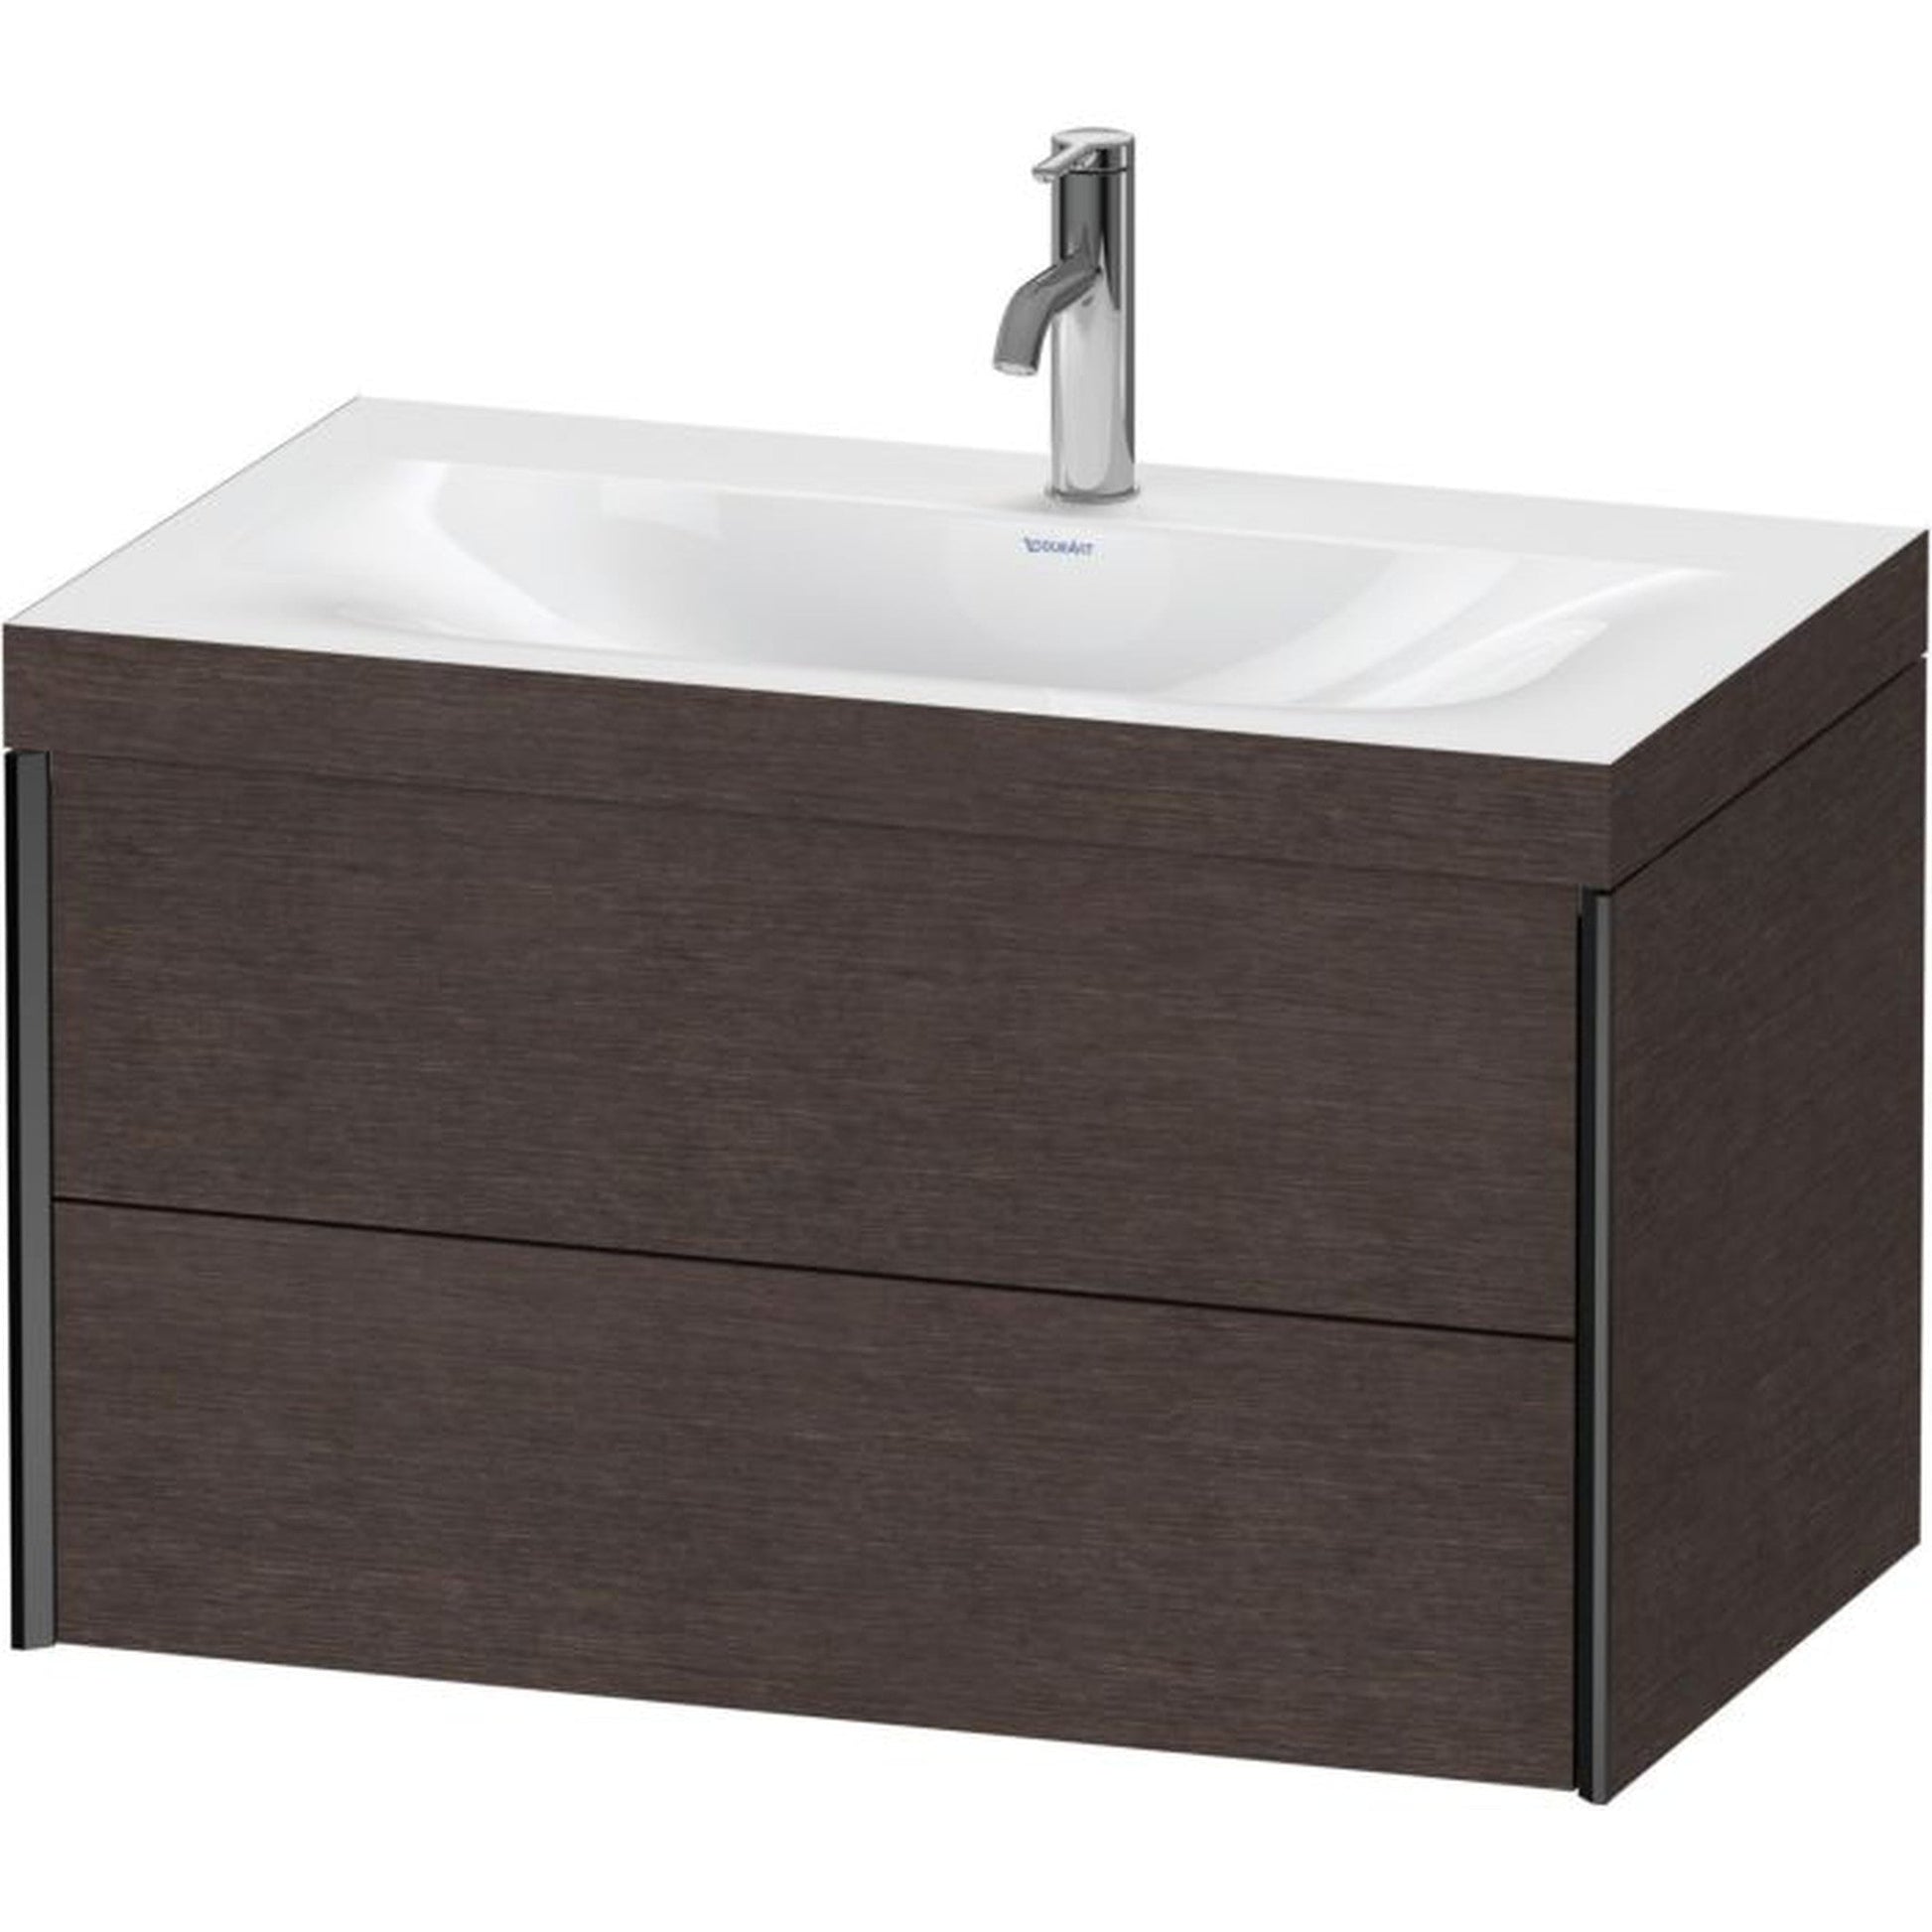 Duravit Xviu 31" x 20" x 19" Two Drawer C-Bonded Wall-Mount Vanity Kit With One Tap Hole, Dark Brushed Oak (XV4615OB272C)